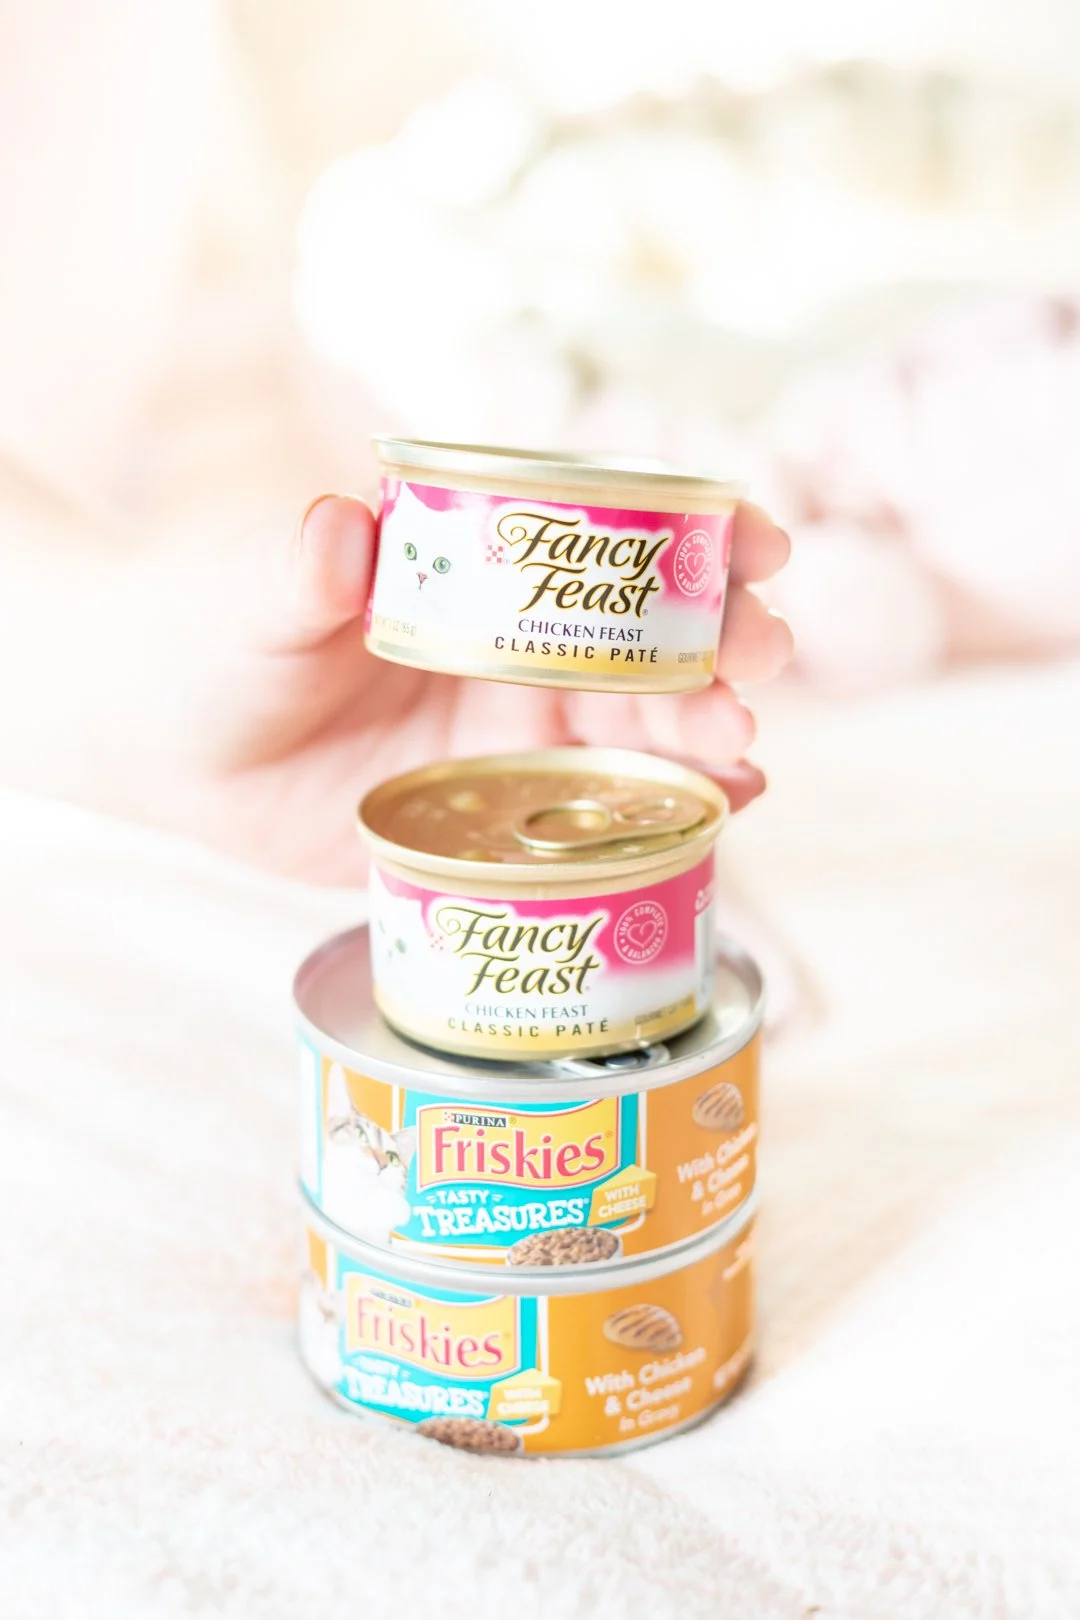 Fancy Feast and Friskies canned food